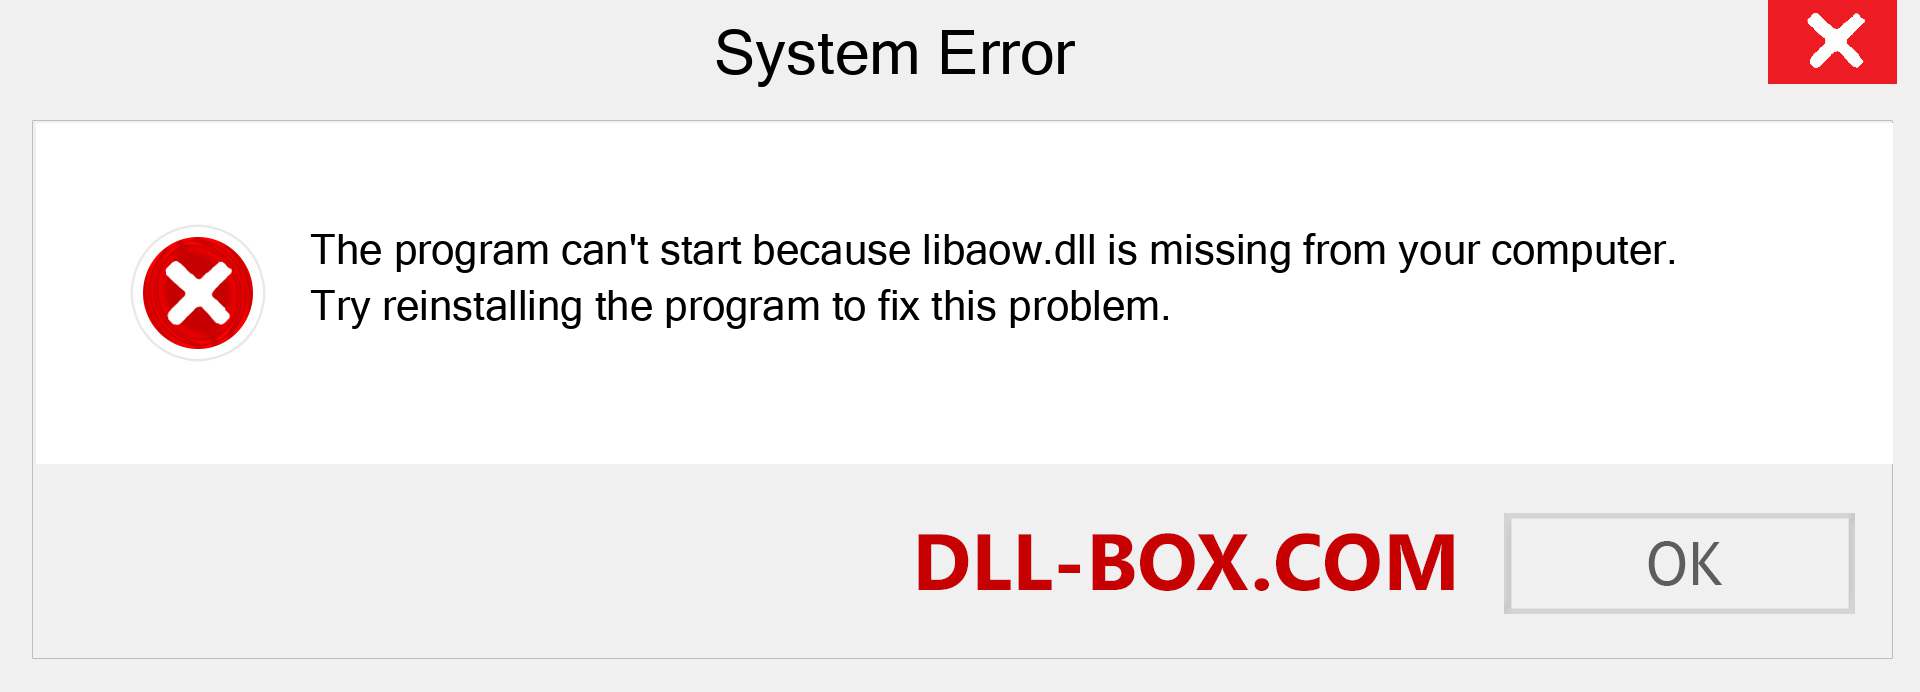  libaow.dll file is missing?. Download for Windows 7, 8, 10 - Fix  libaow dll Missing Error on Windows, photos, images